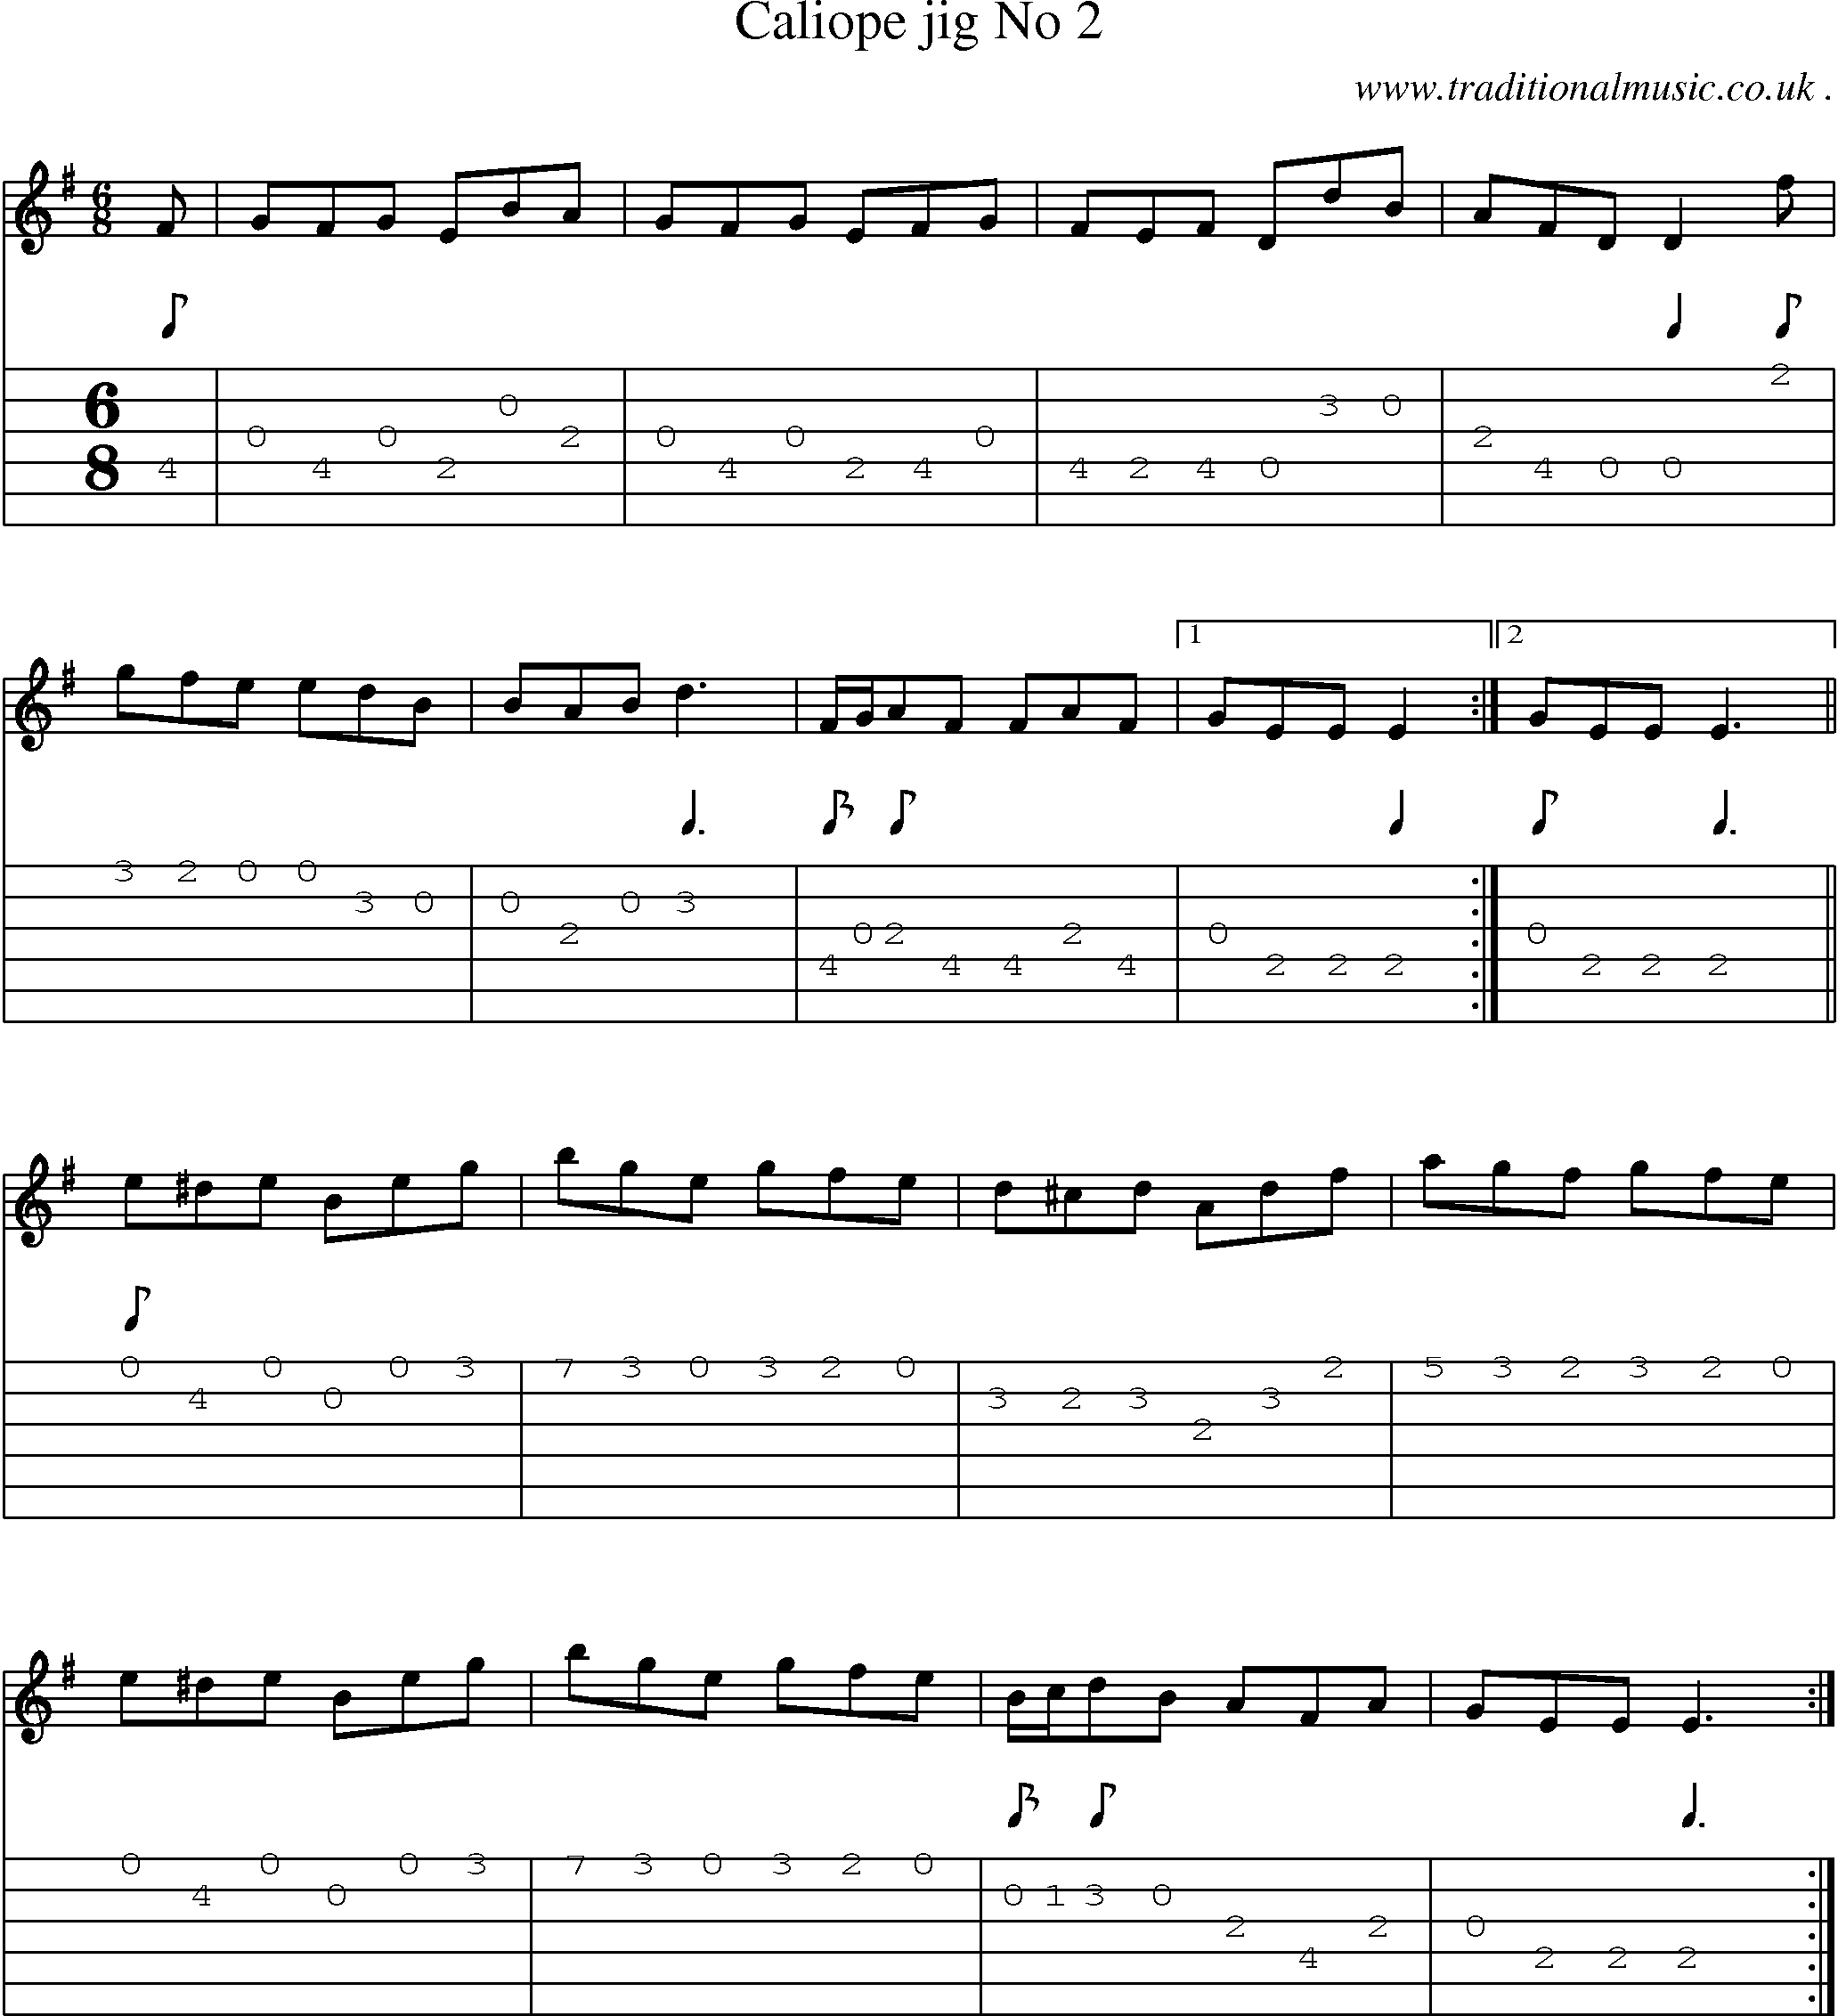 Sheet-Music and Guitar Tabs for Caliope Jig No 2